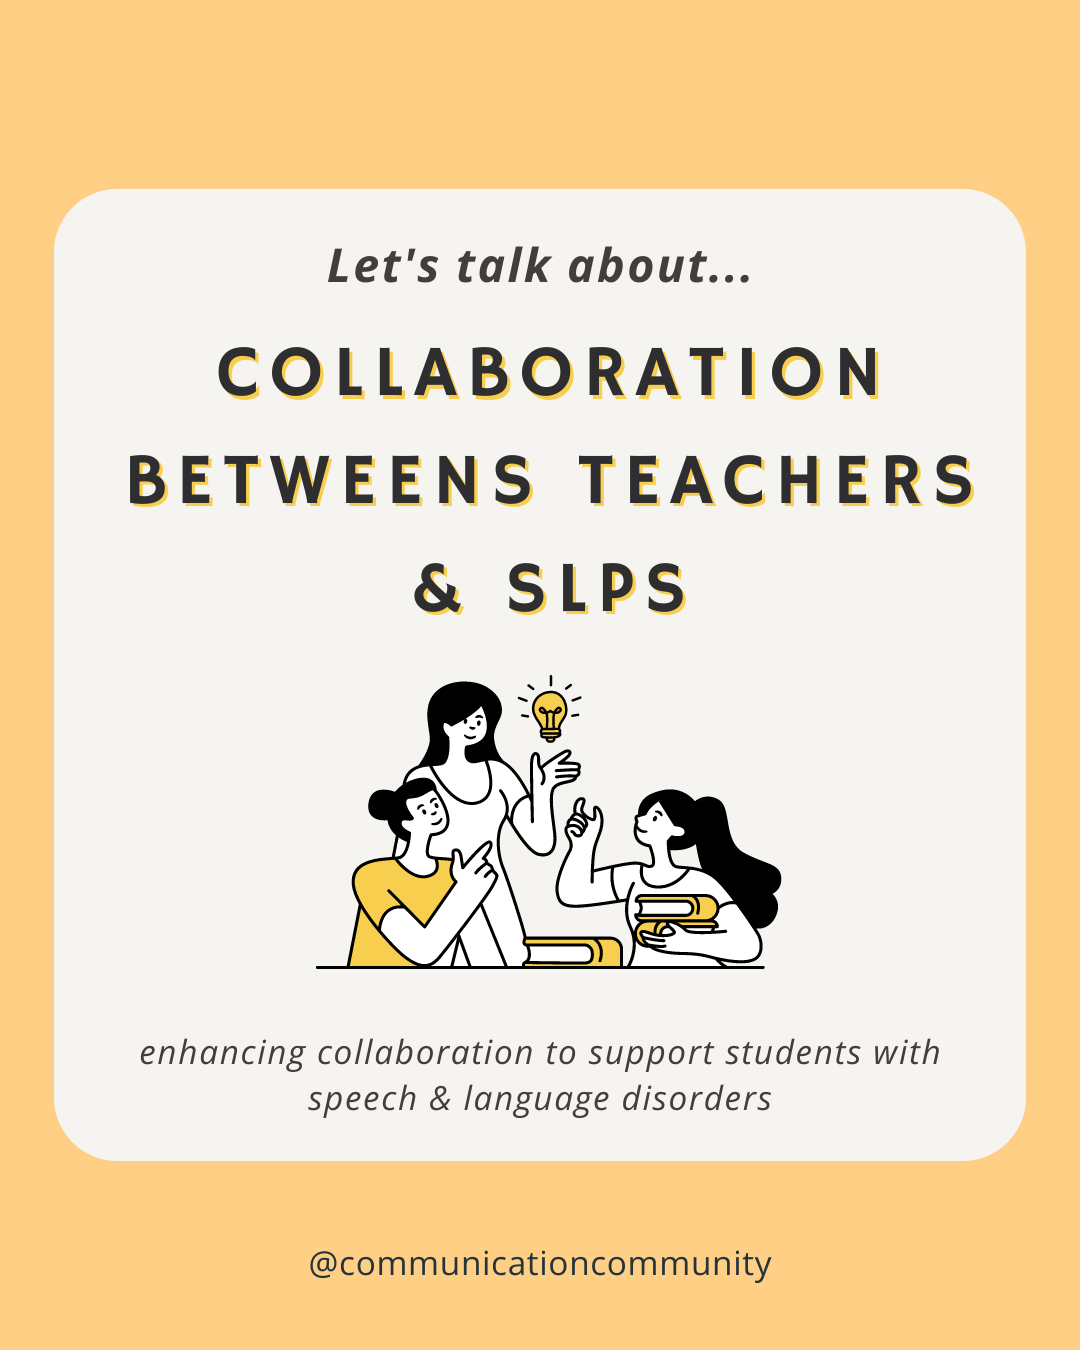 How SLPs and Teachers Can Collaborate Effectively